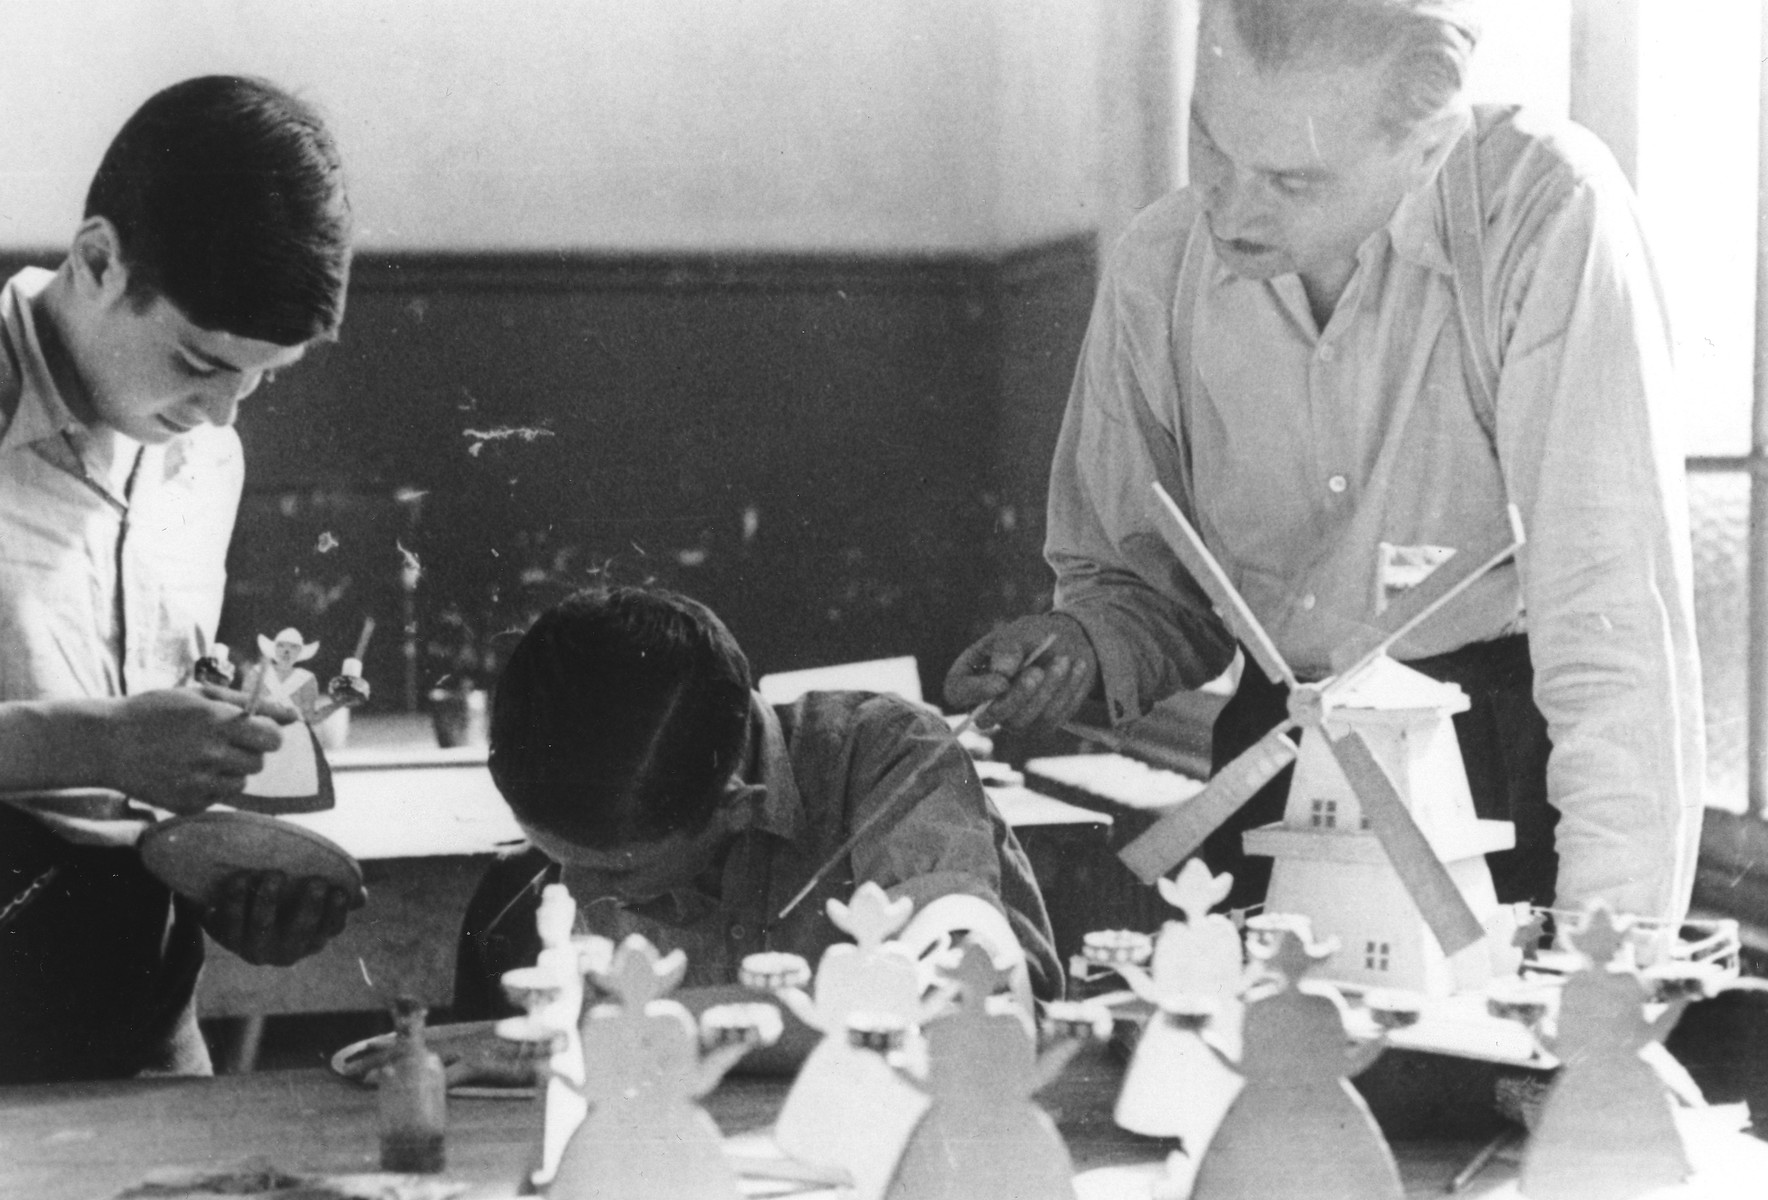 Two Jewish boys make figurines in a woodworking class in the Ecouis children's home.

Pictured at the left is Hans Oster, and in the center is Ivar Segalowitz.